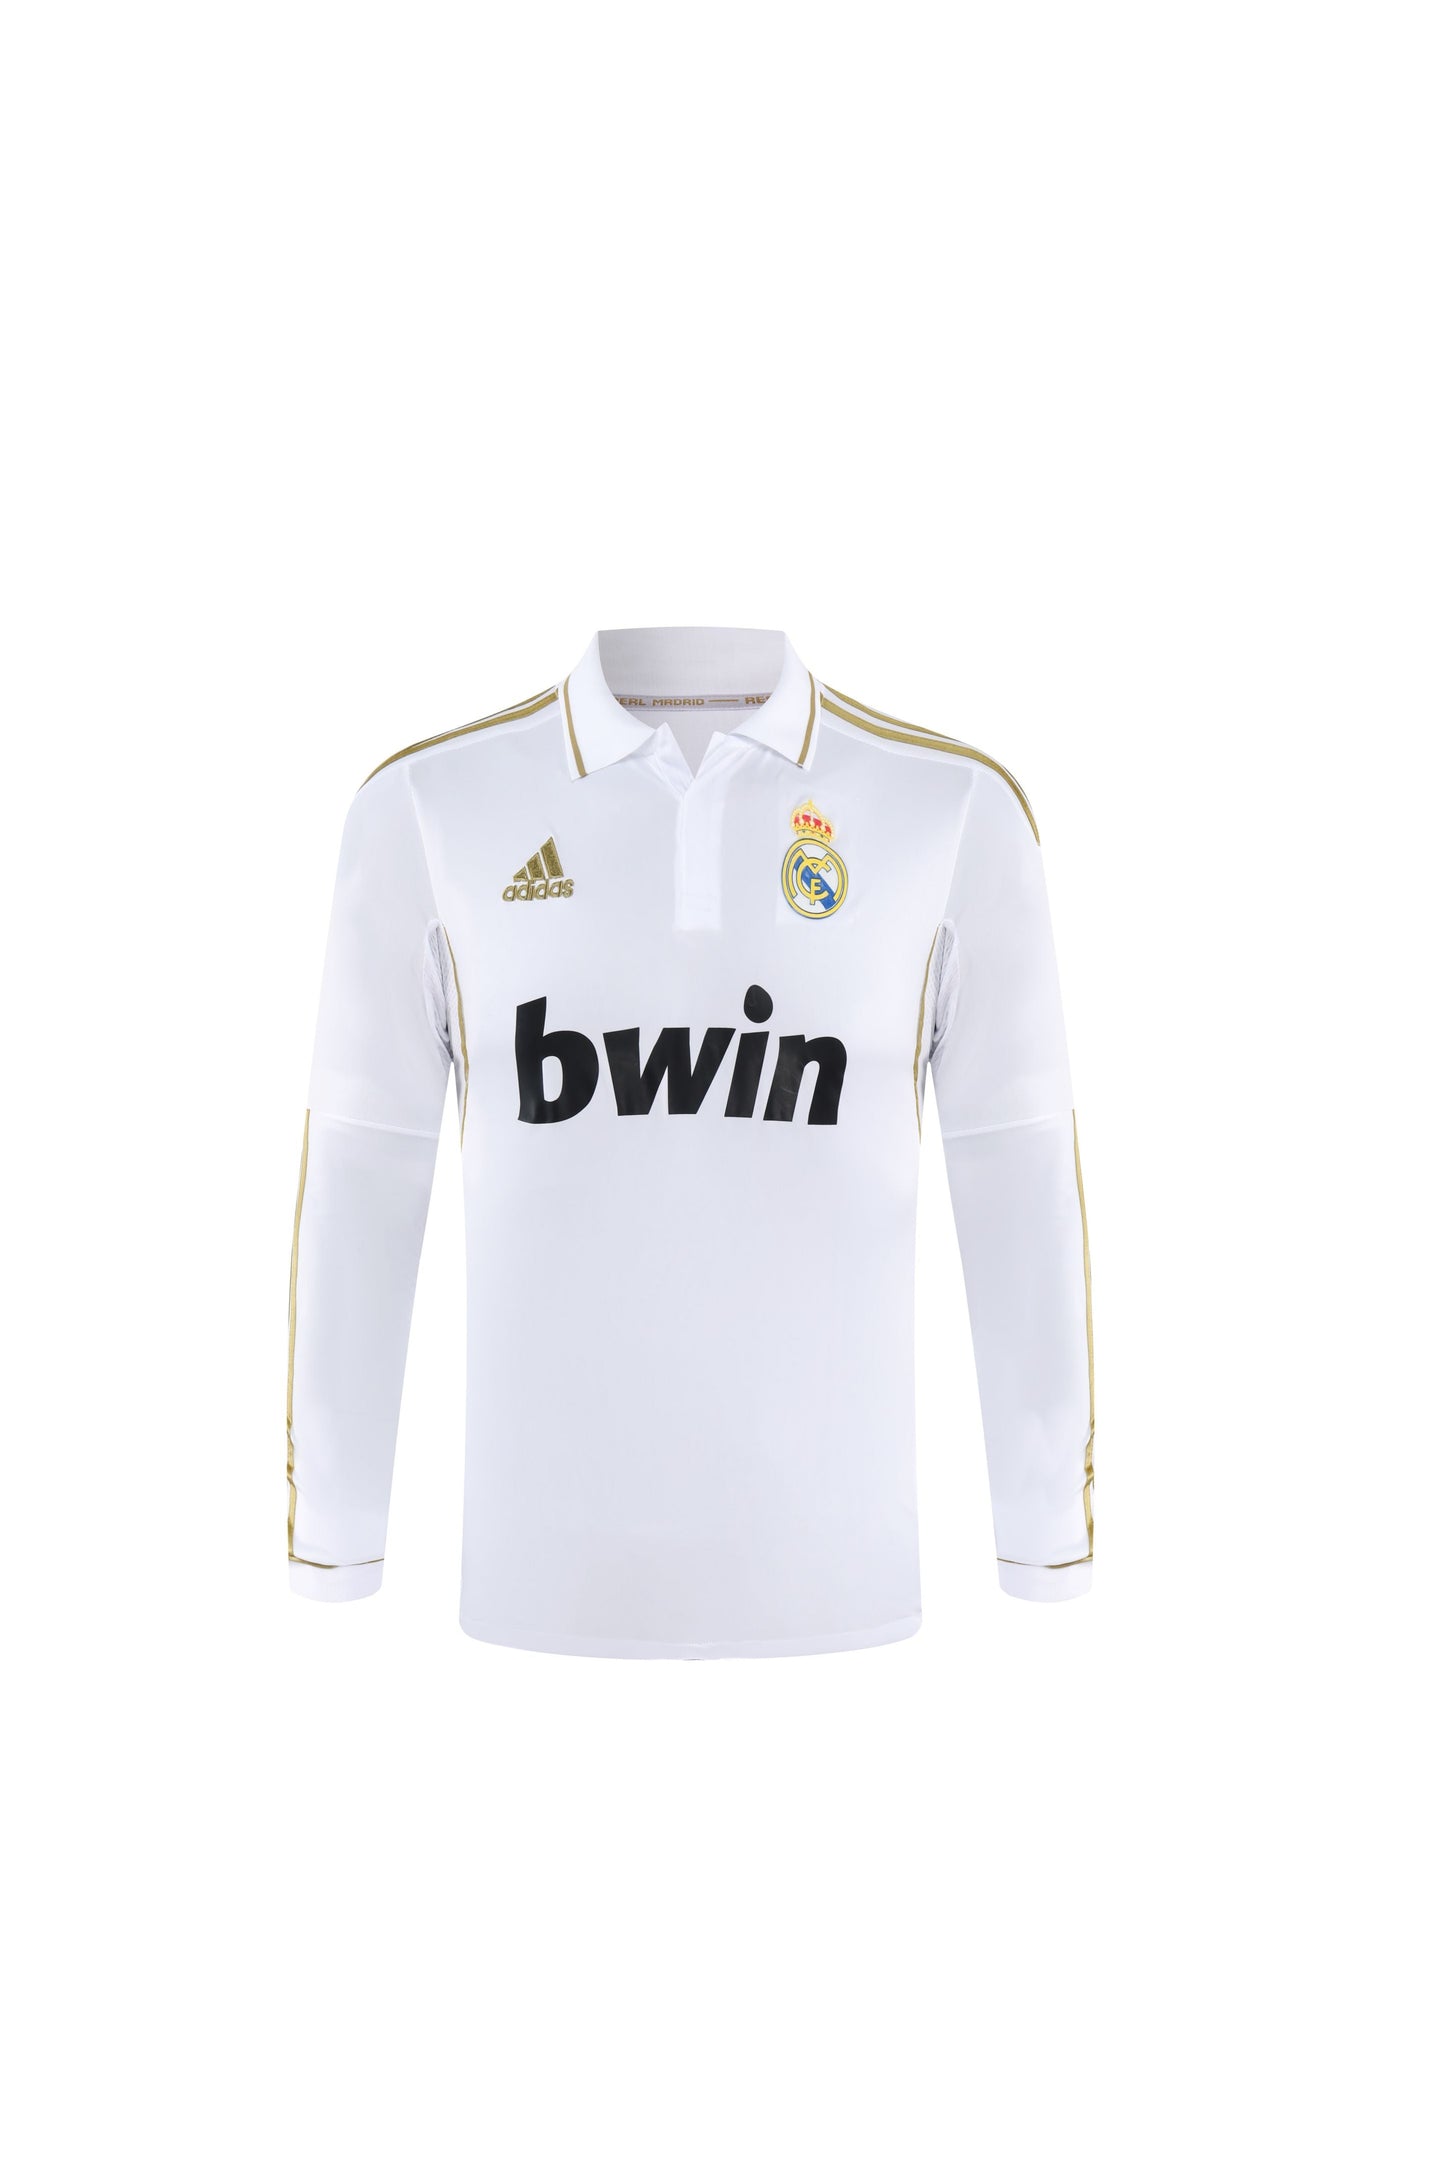 Real Madrid home long sleeves for the 2011/12 season